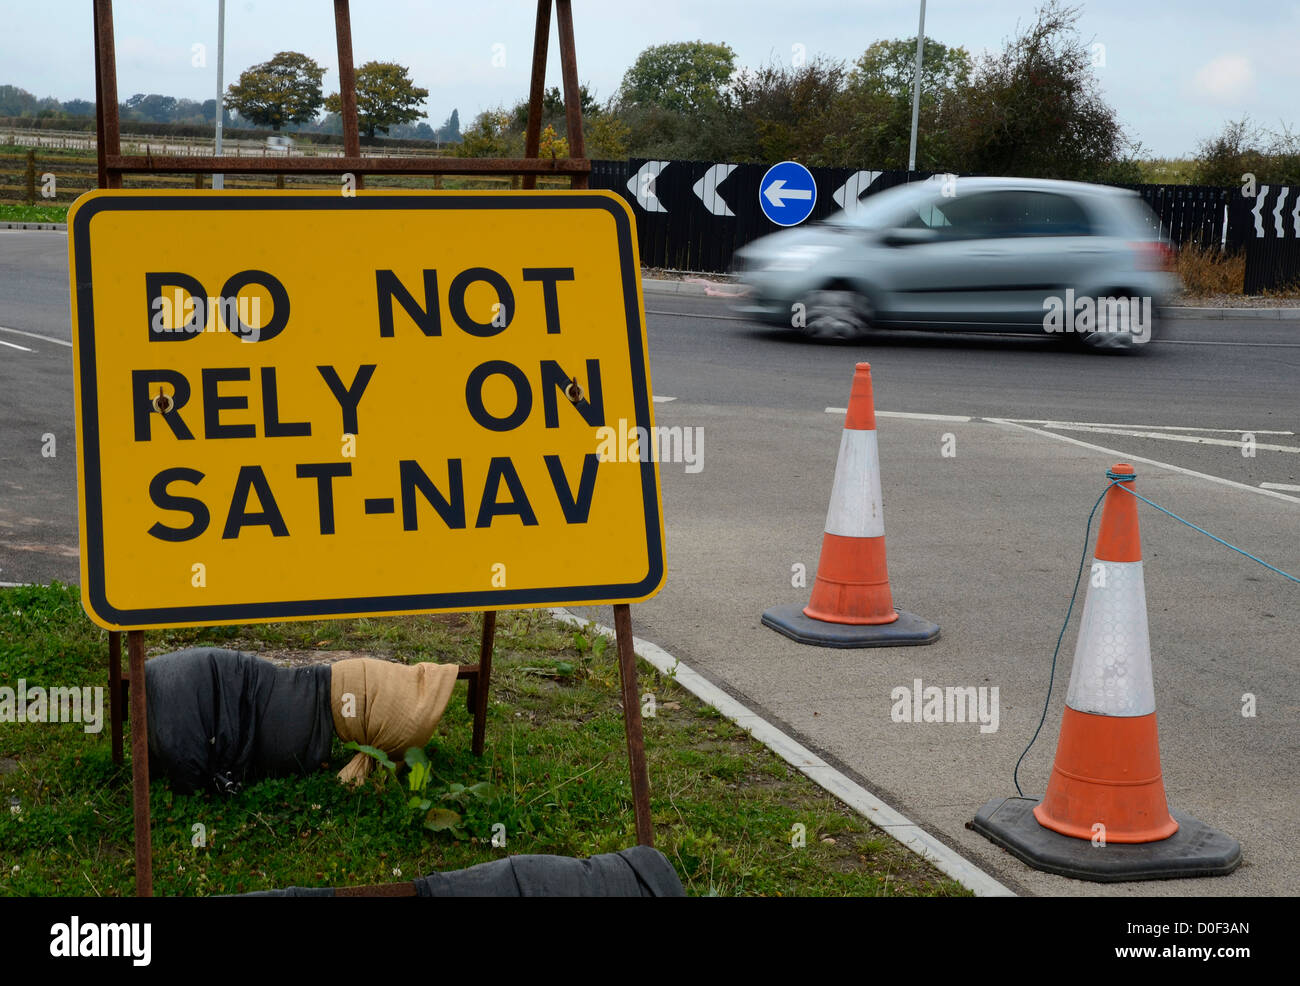 A road sign advising not to rely on sat nav devices Stock Photo